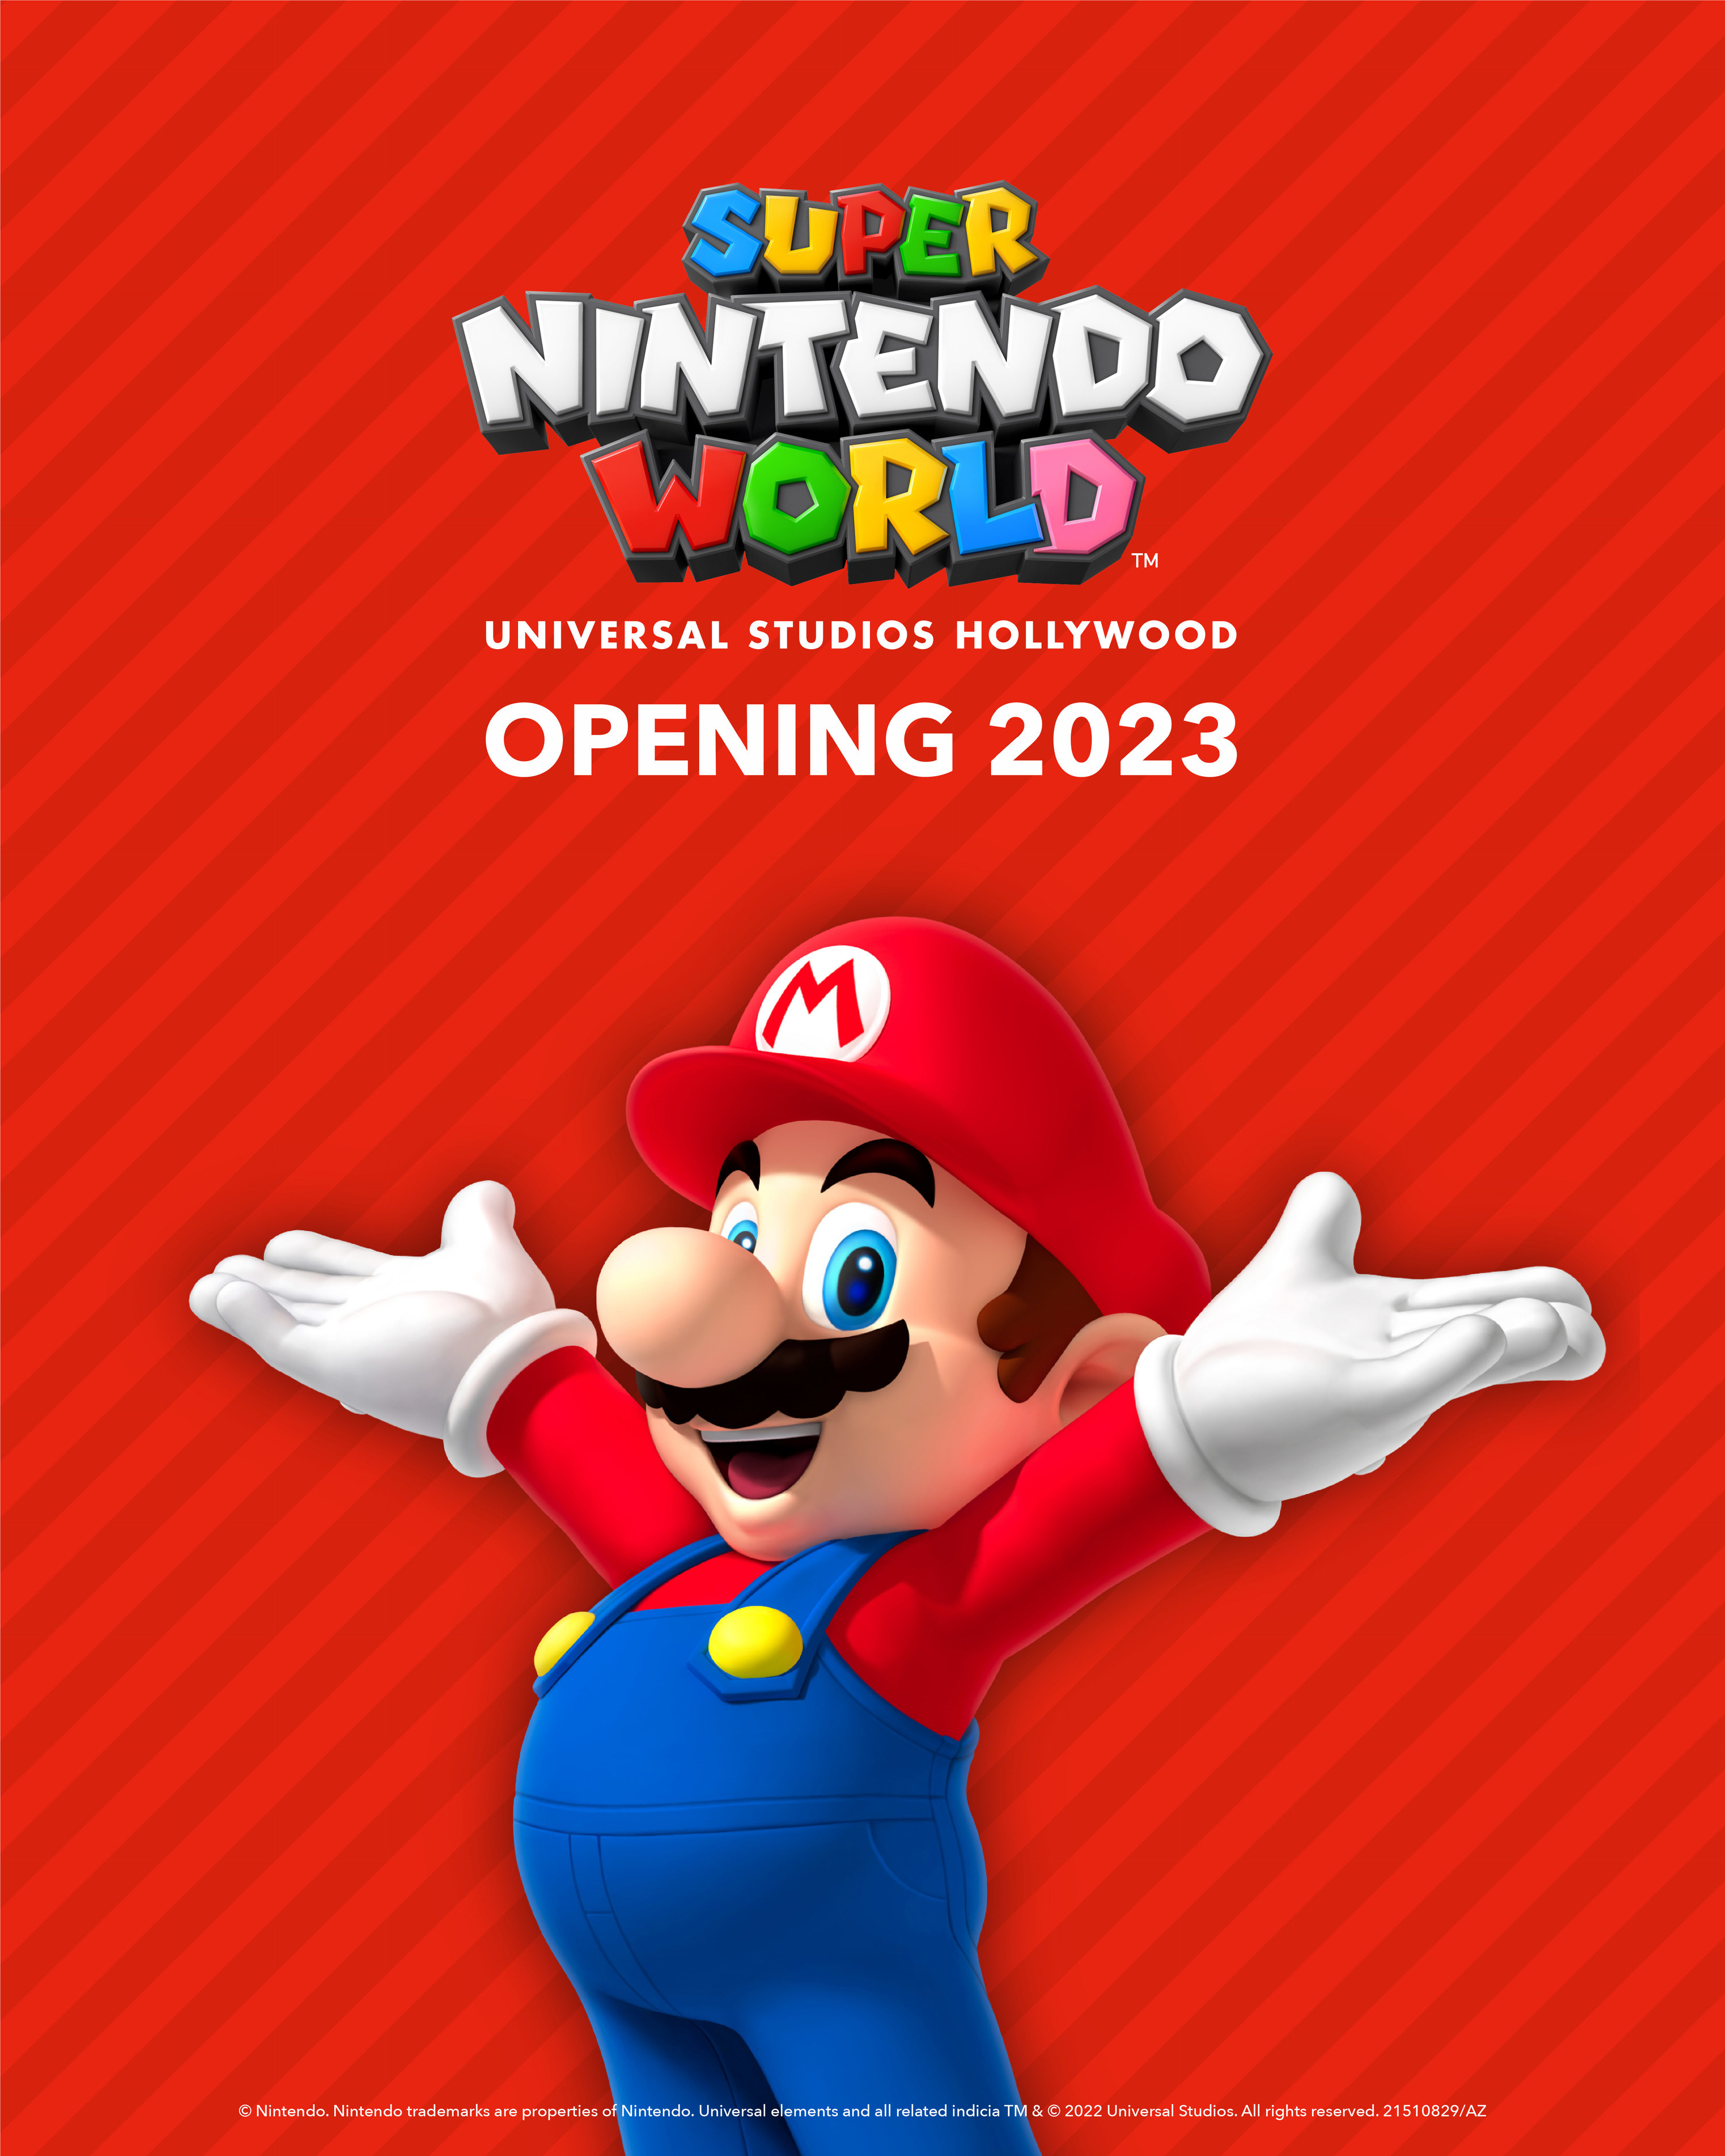 Advertisement for the world with Mario holding his hands up